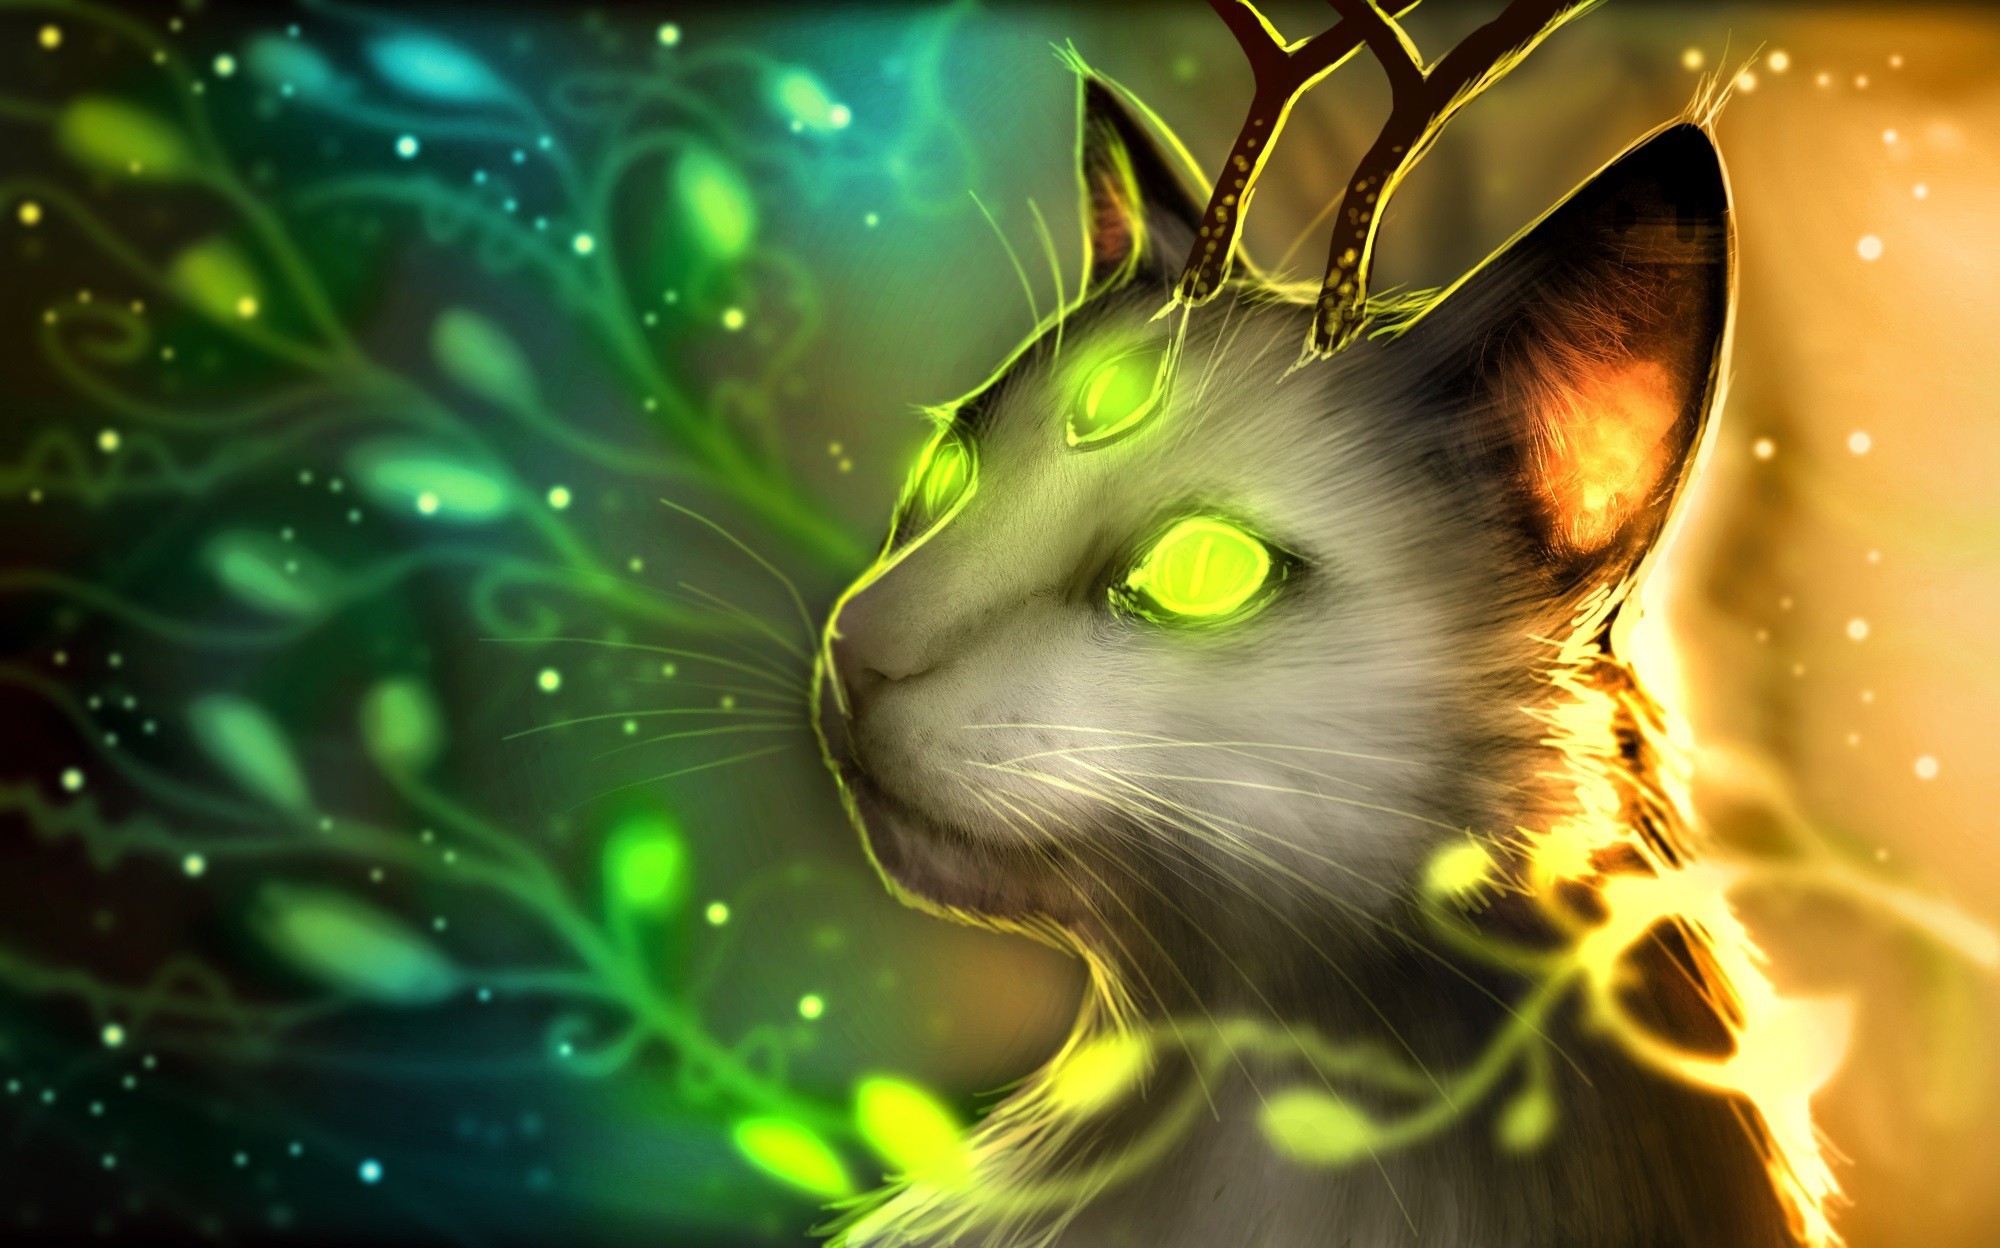 fantasy Art, Romantically Apocalyptic, Cat, Antlers, Glowing, Green